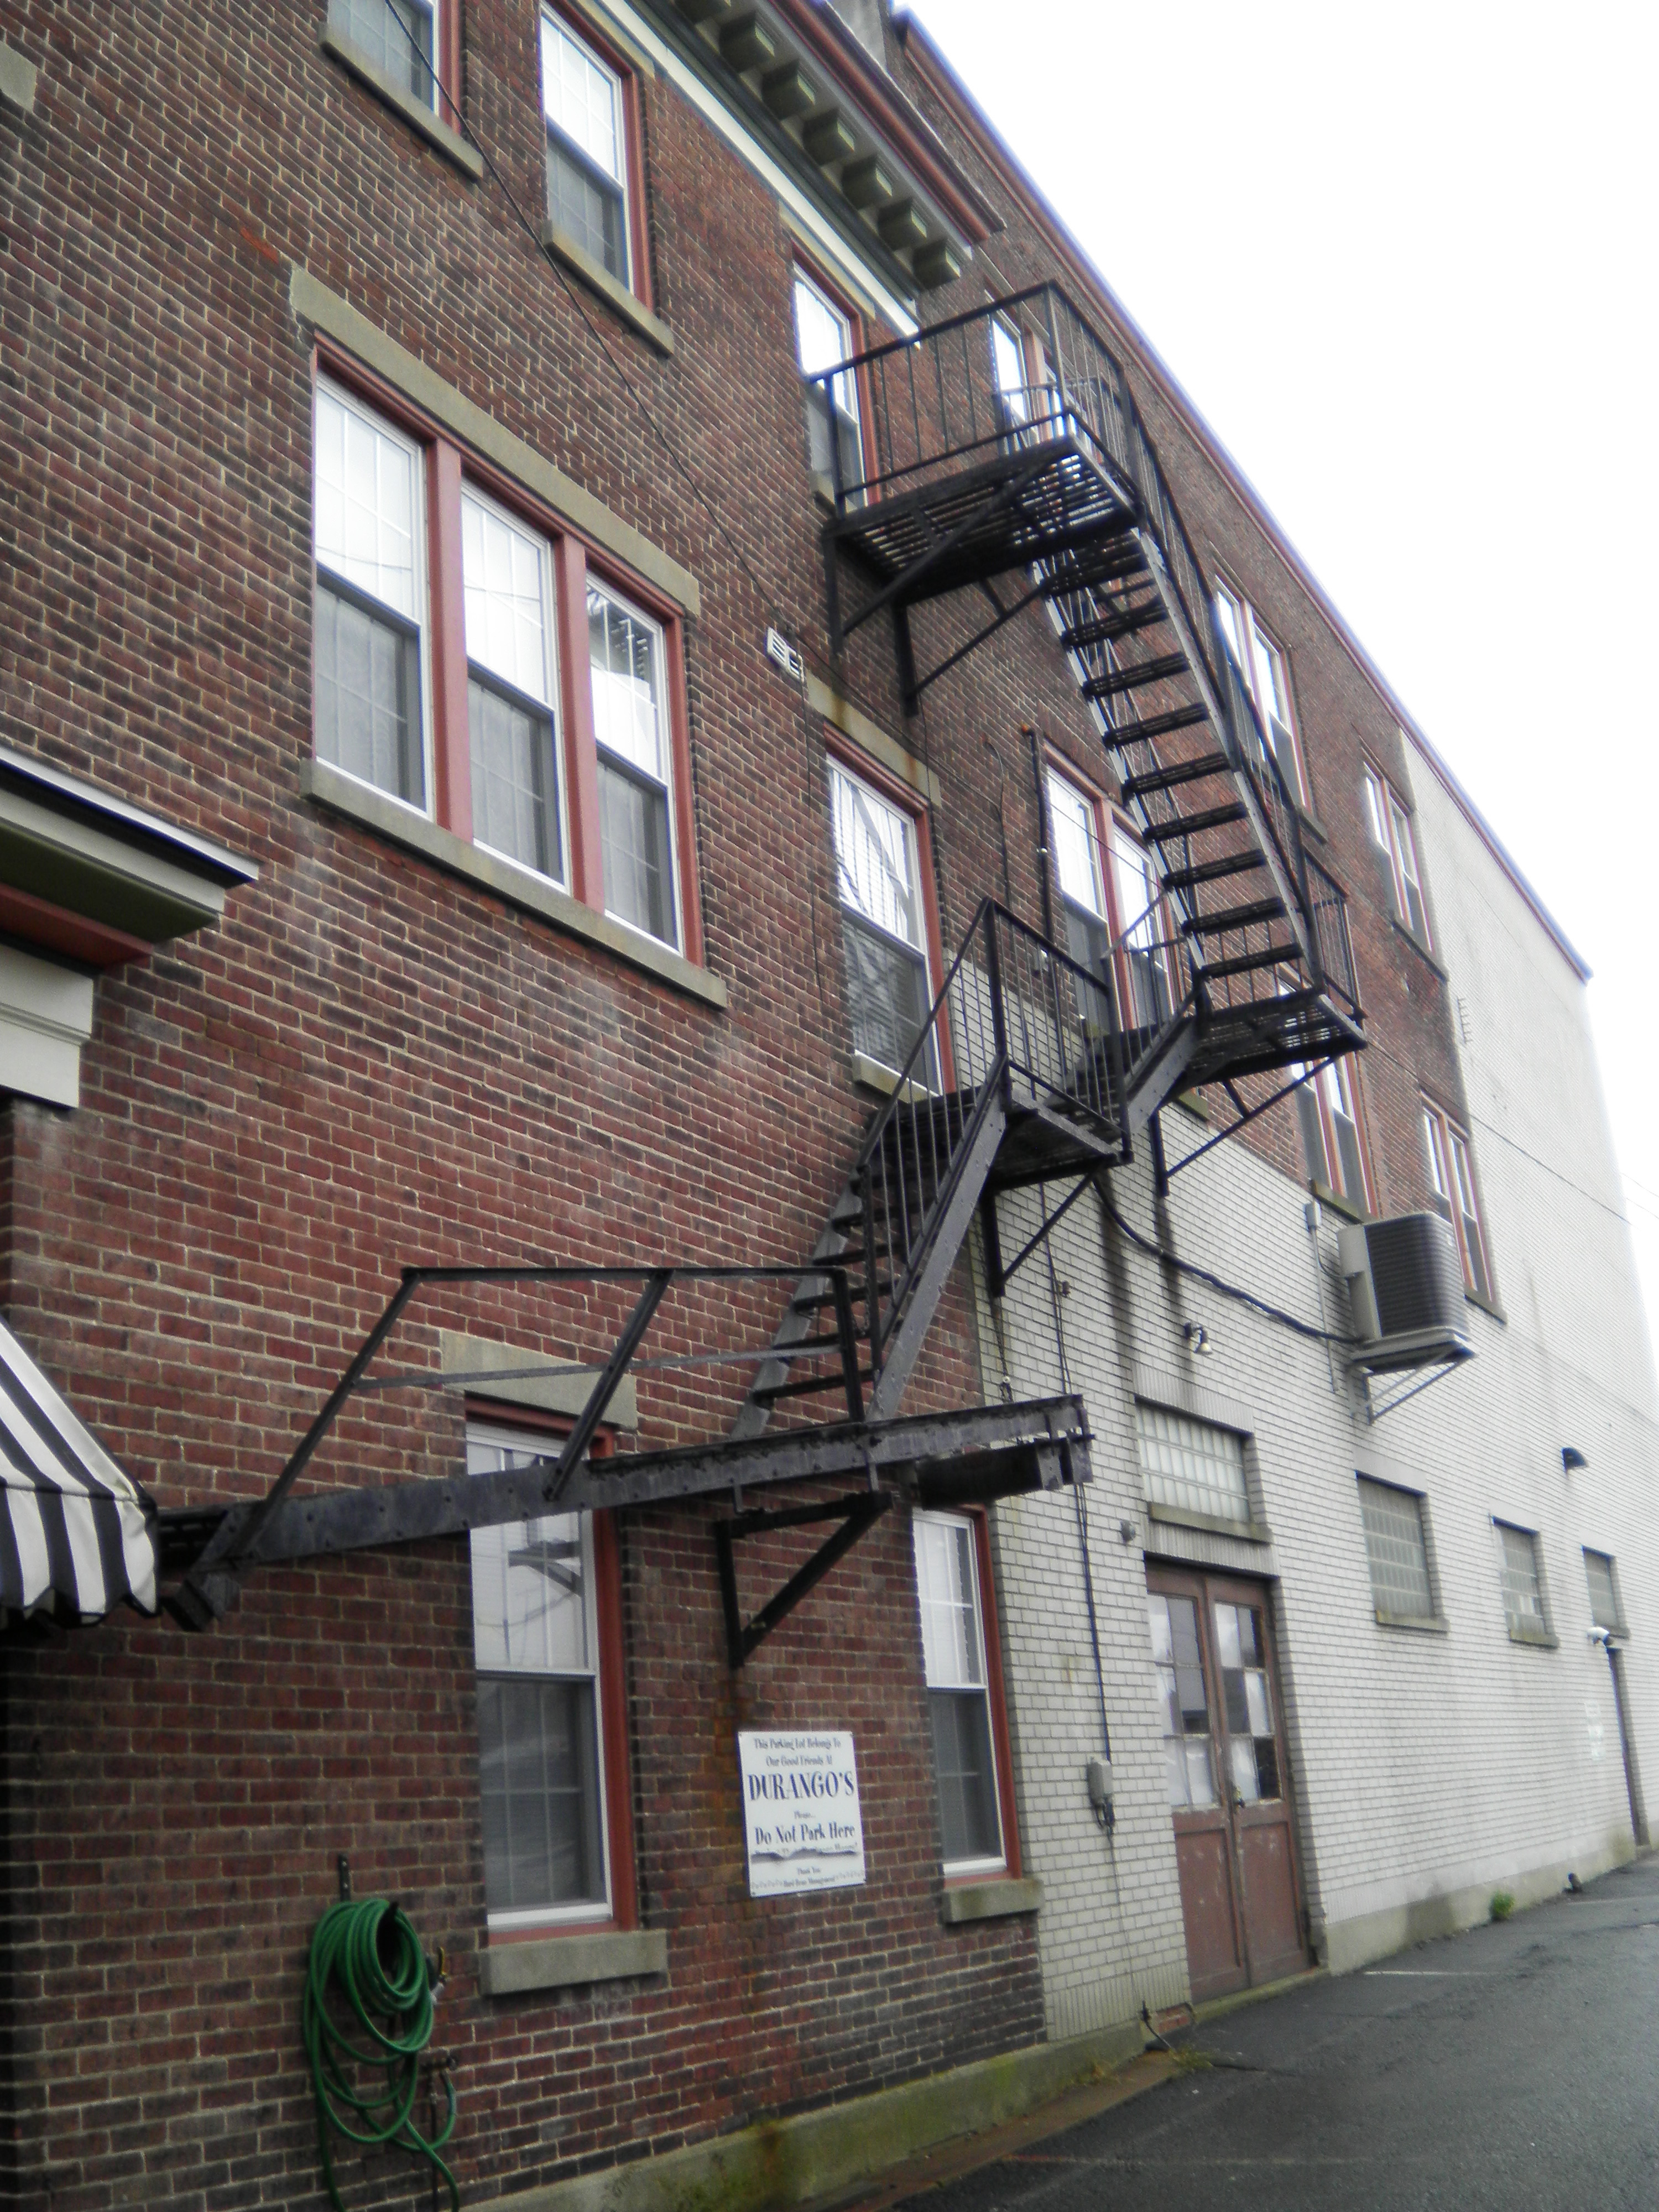 Fire escape on the building where the Rhoads Opera House was